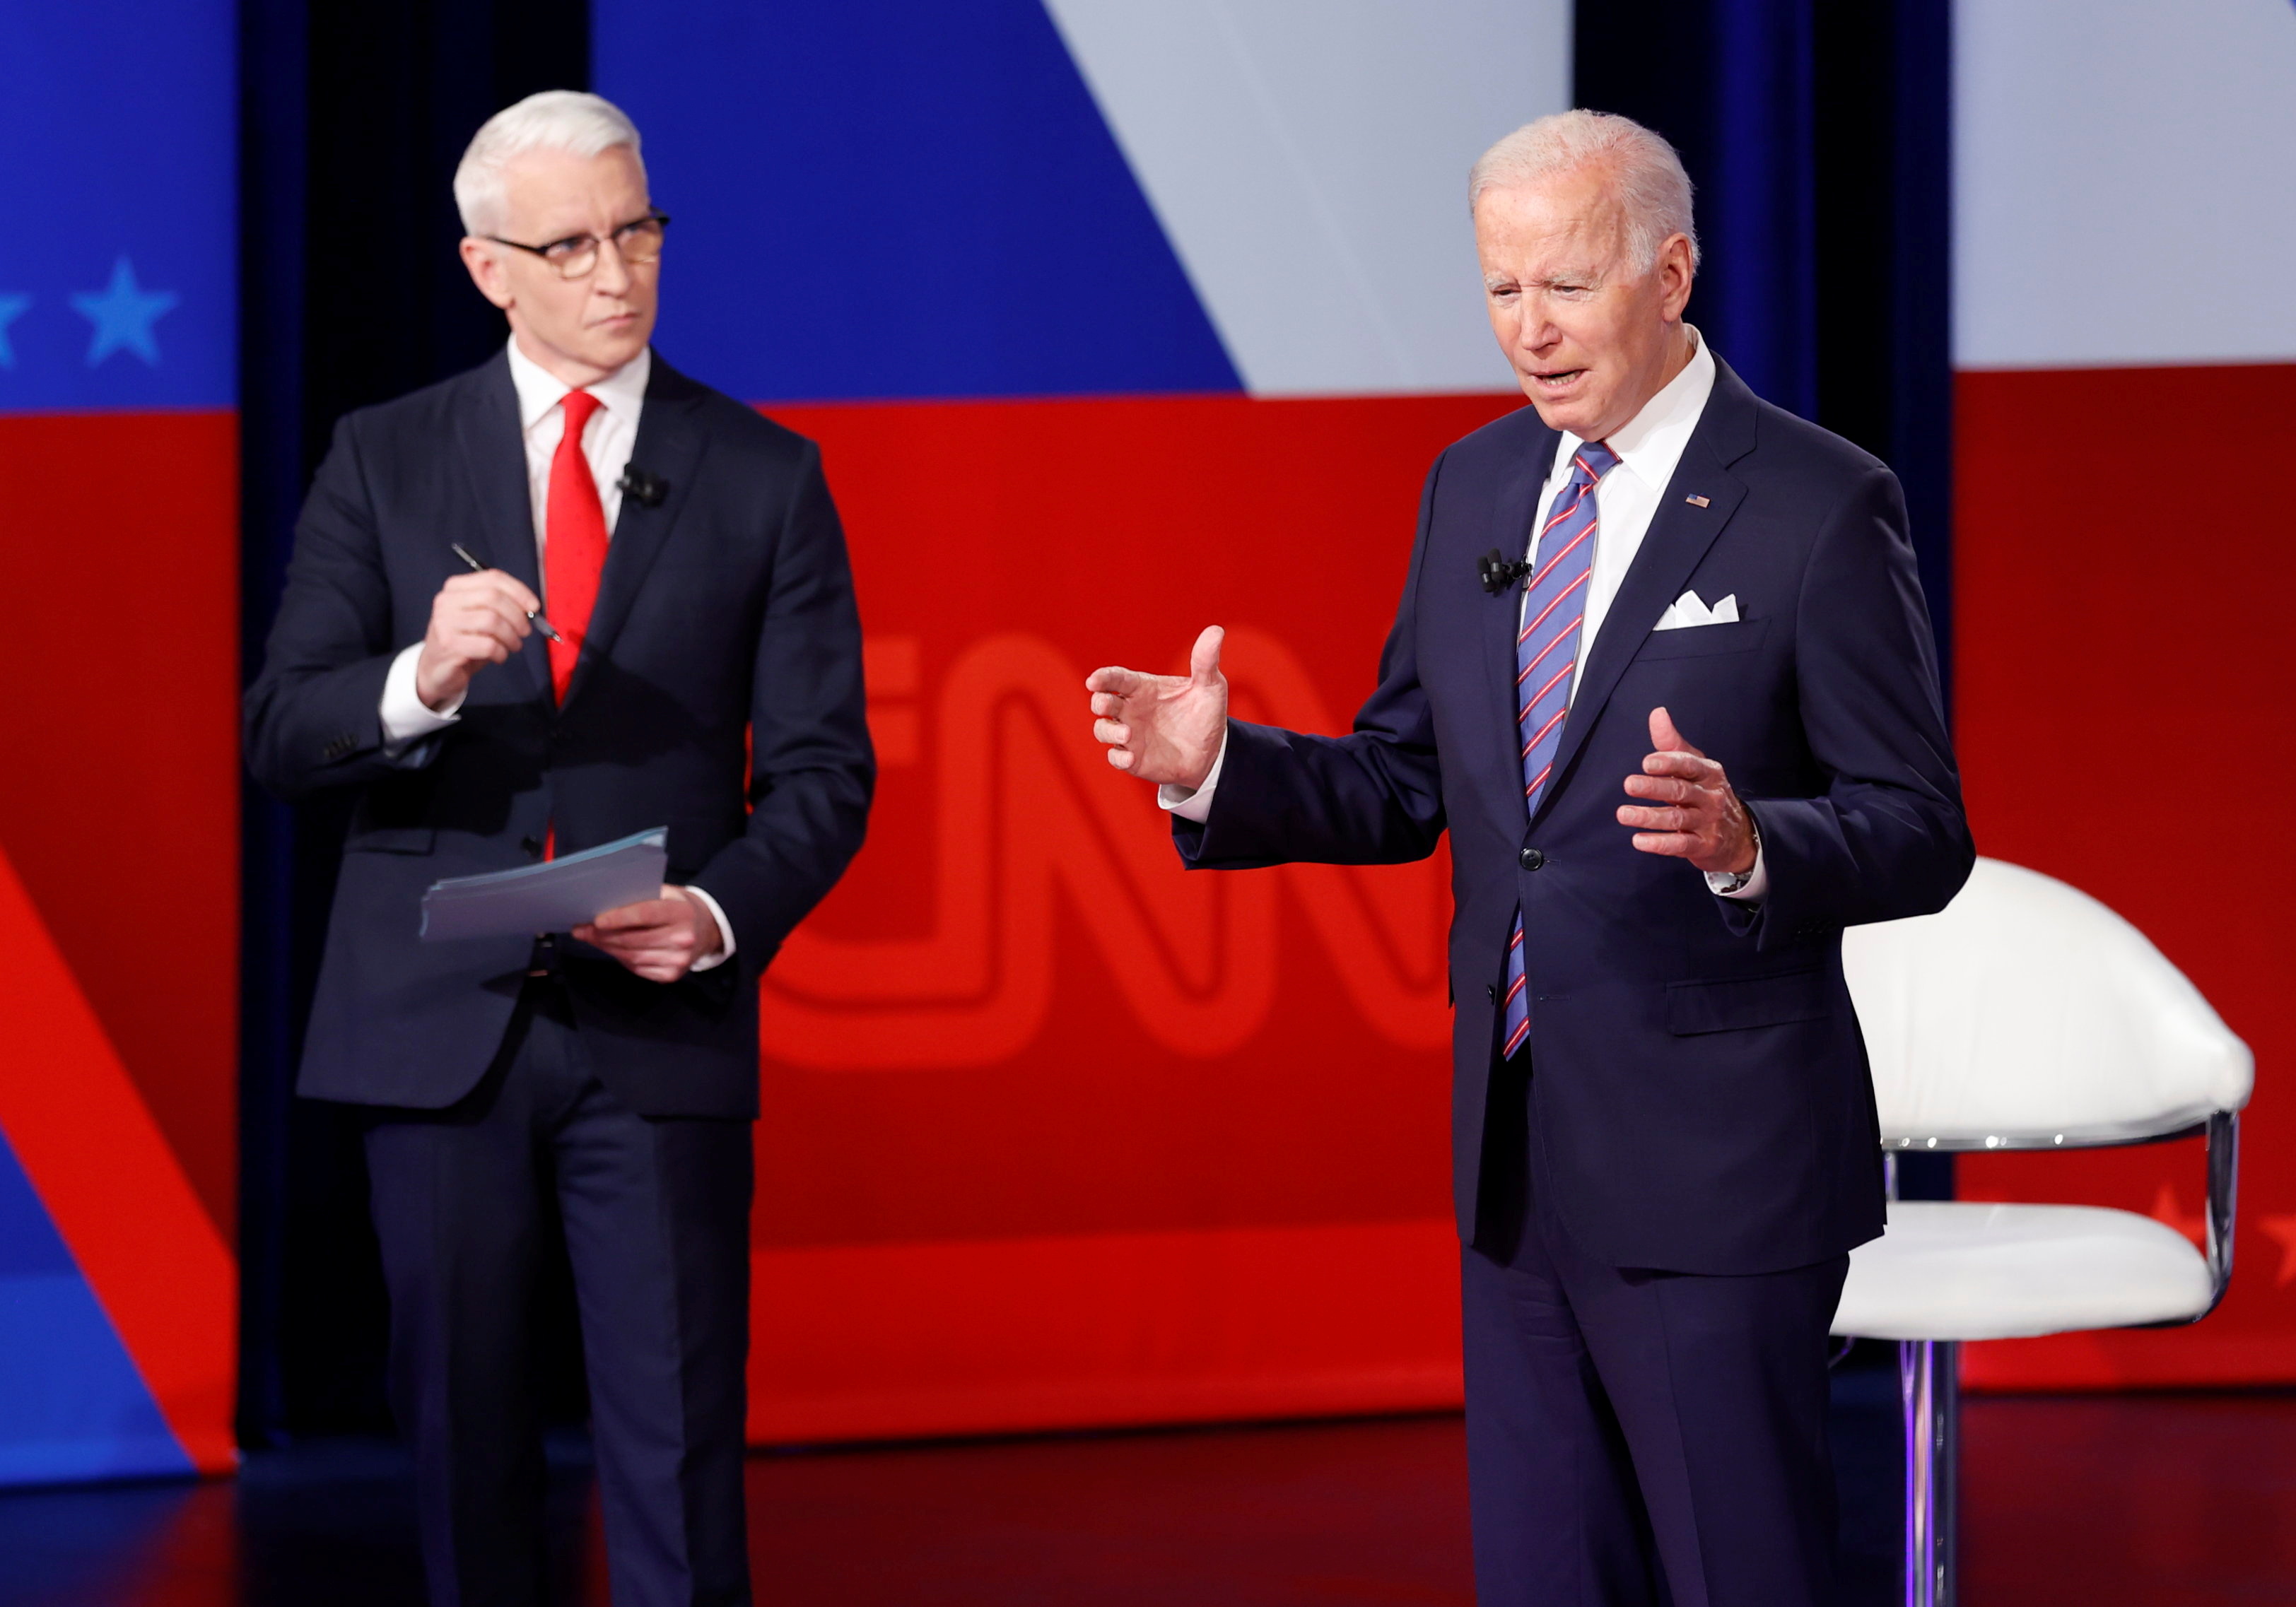 U.S. President Joe Biden participates in a town hall about his infrastructure investment proposals with CNN's Anderson Cooper at the Baltimore Center Stage Pearlstone Theater in Baltimore, Maryland, U.S. October 21, 2021. REUTERS/Jonathan Ernst